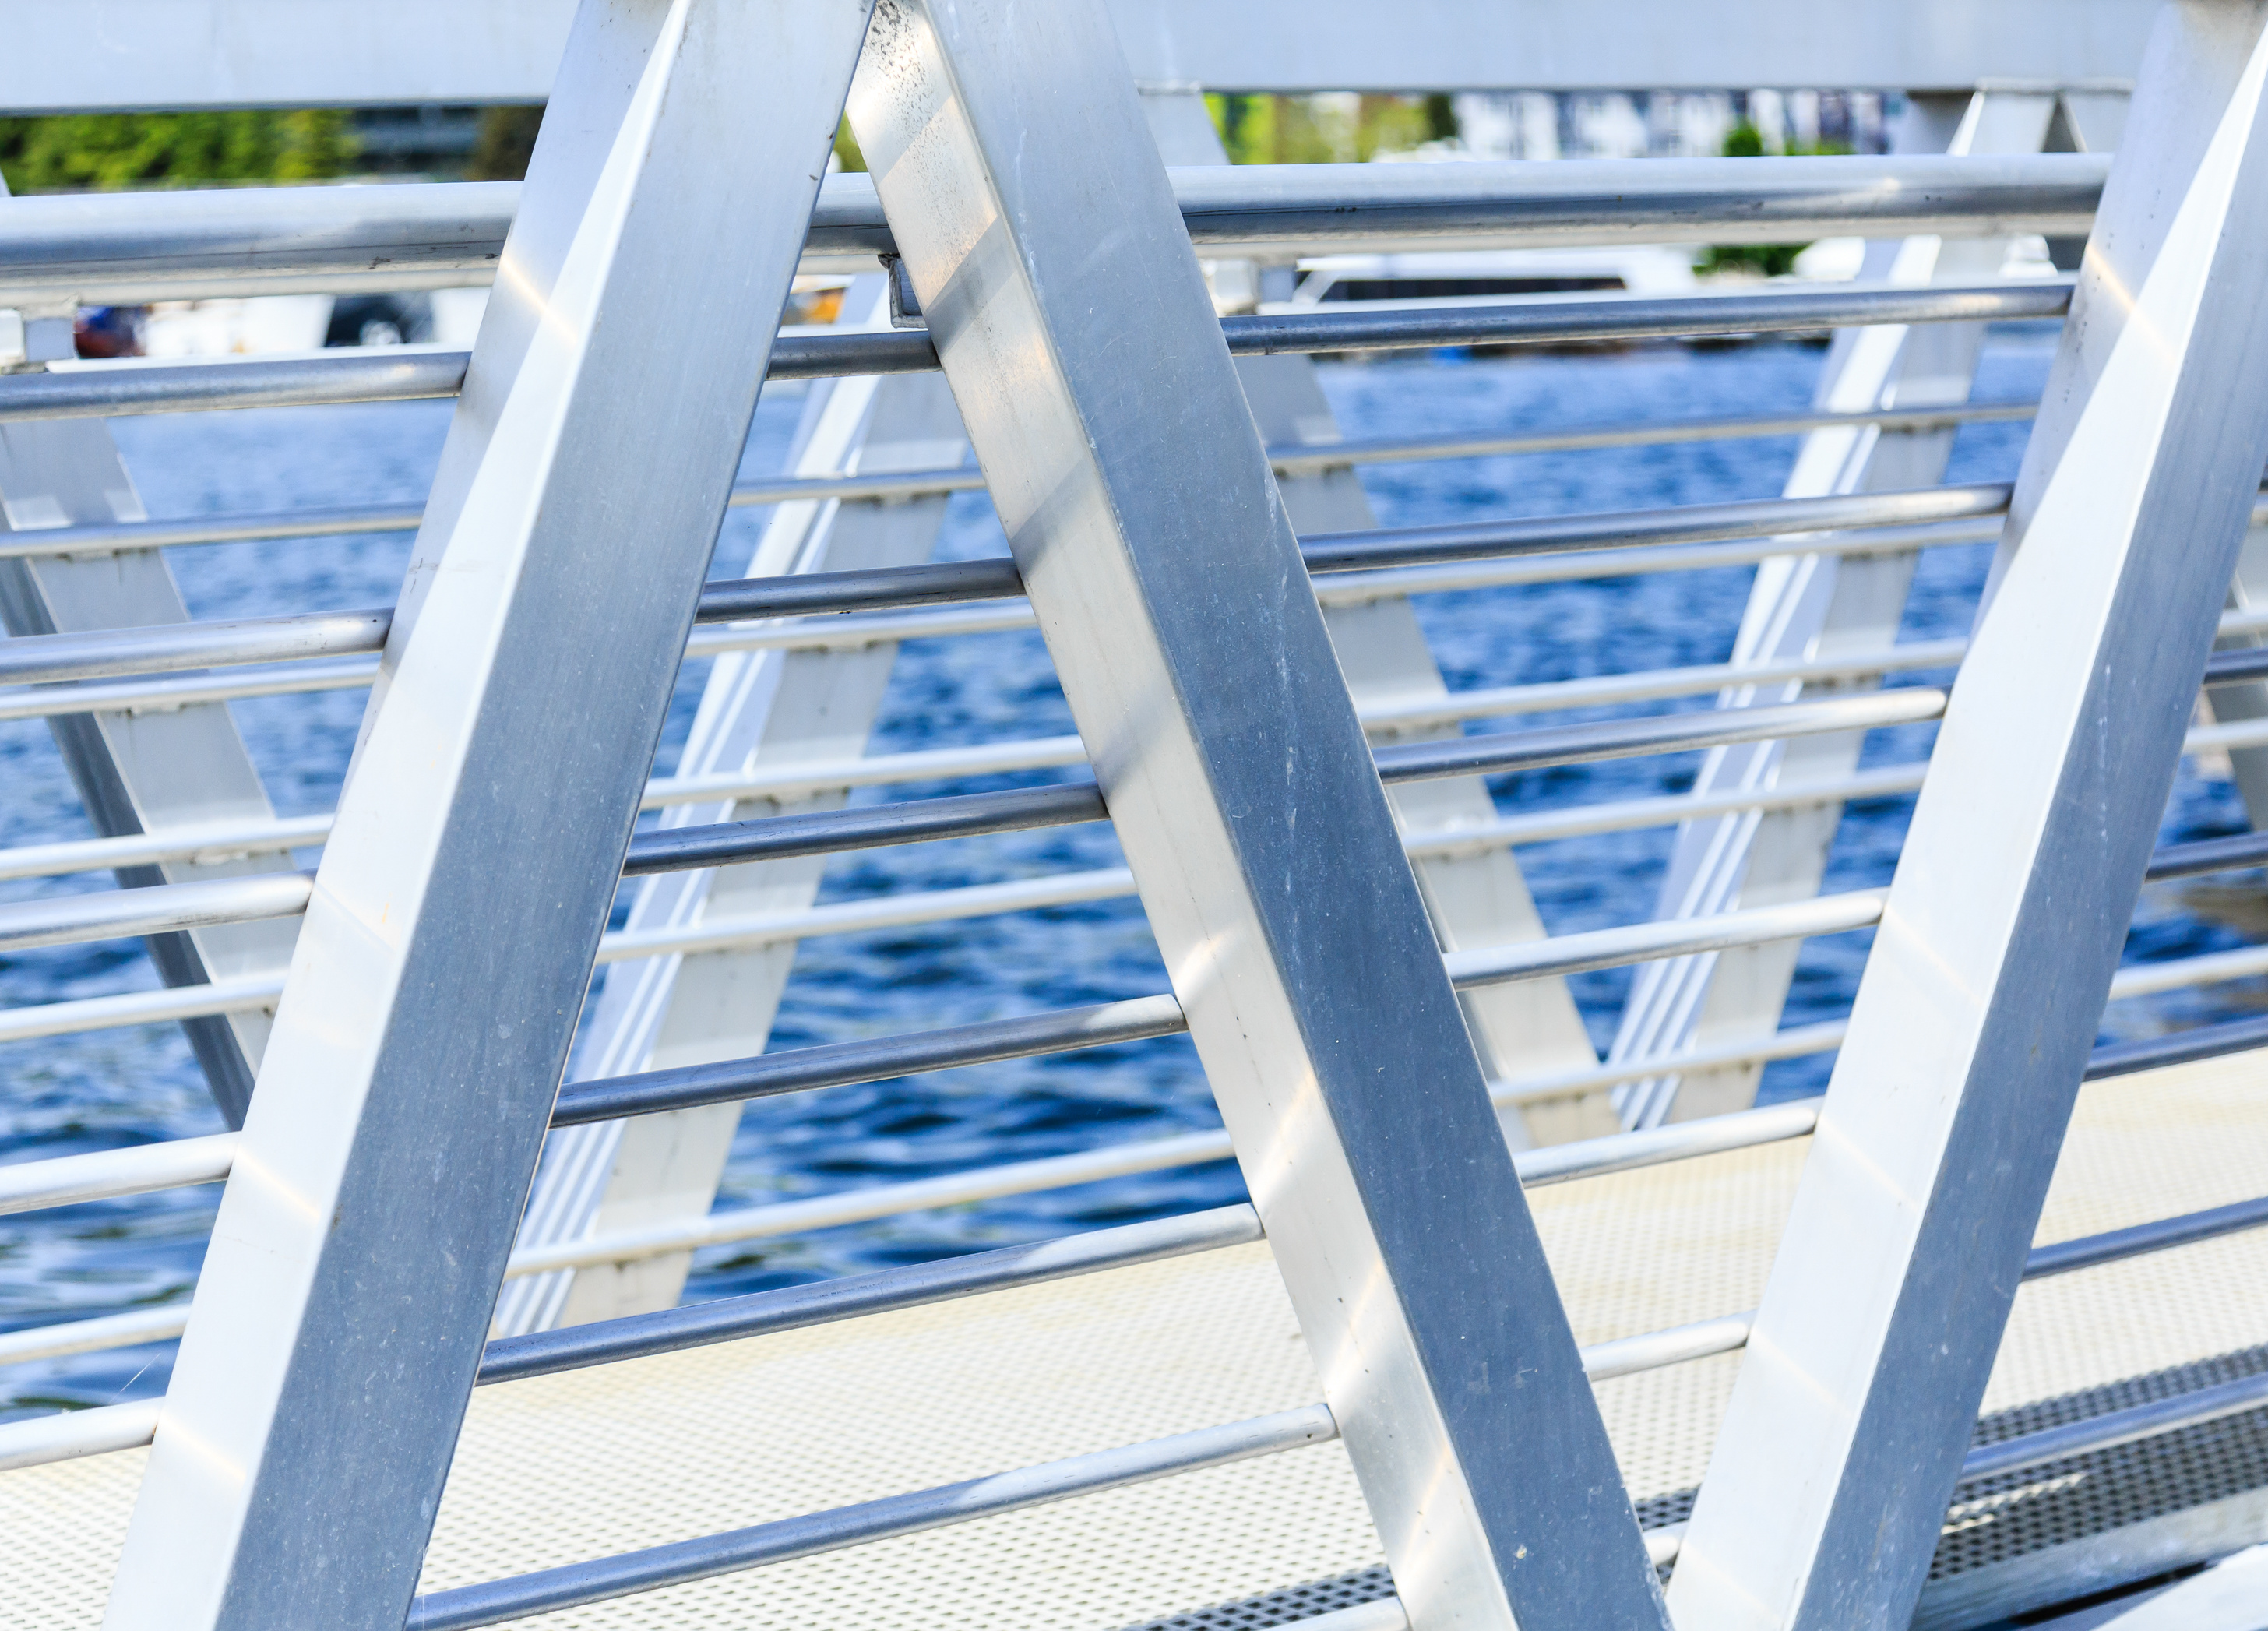 aluminum structures are much lighter than steel. Source: Adobe Stock/dbvirago